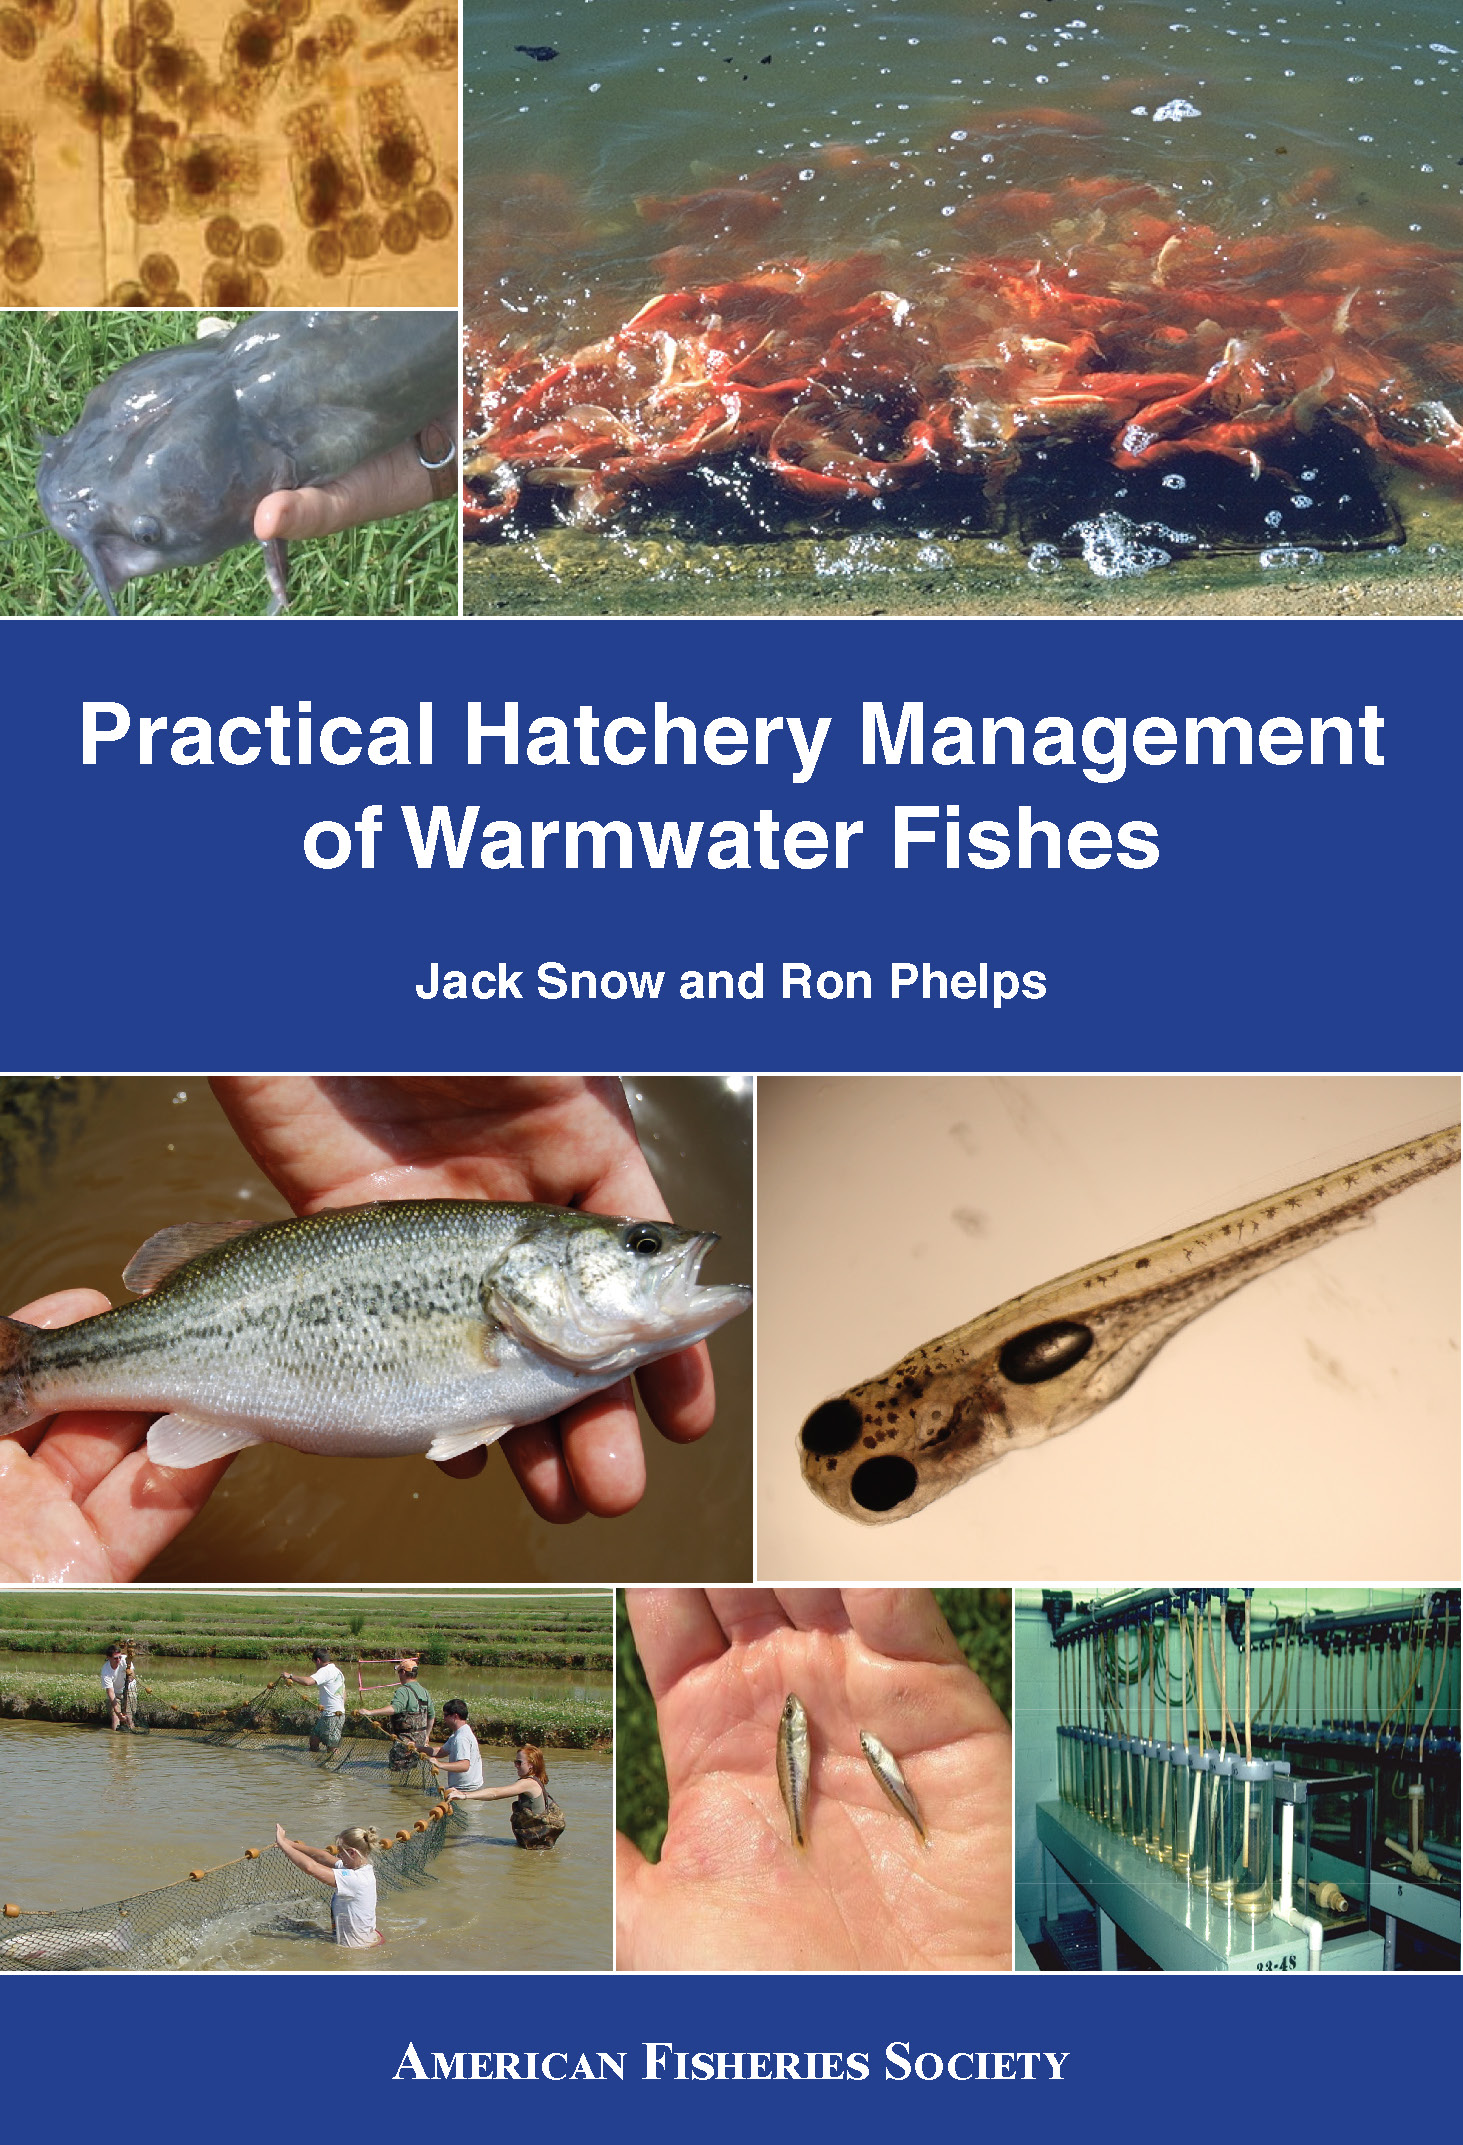 Warmwater Fishes Cover